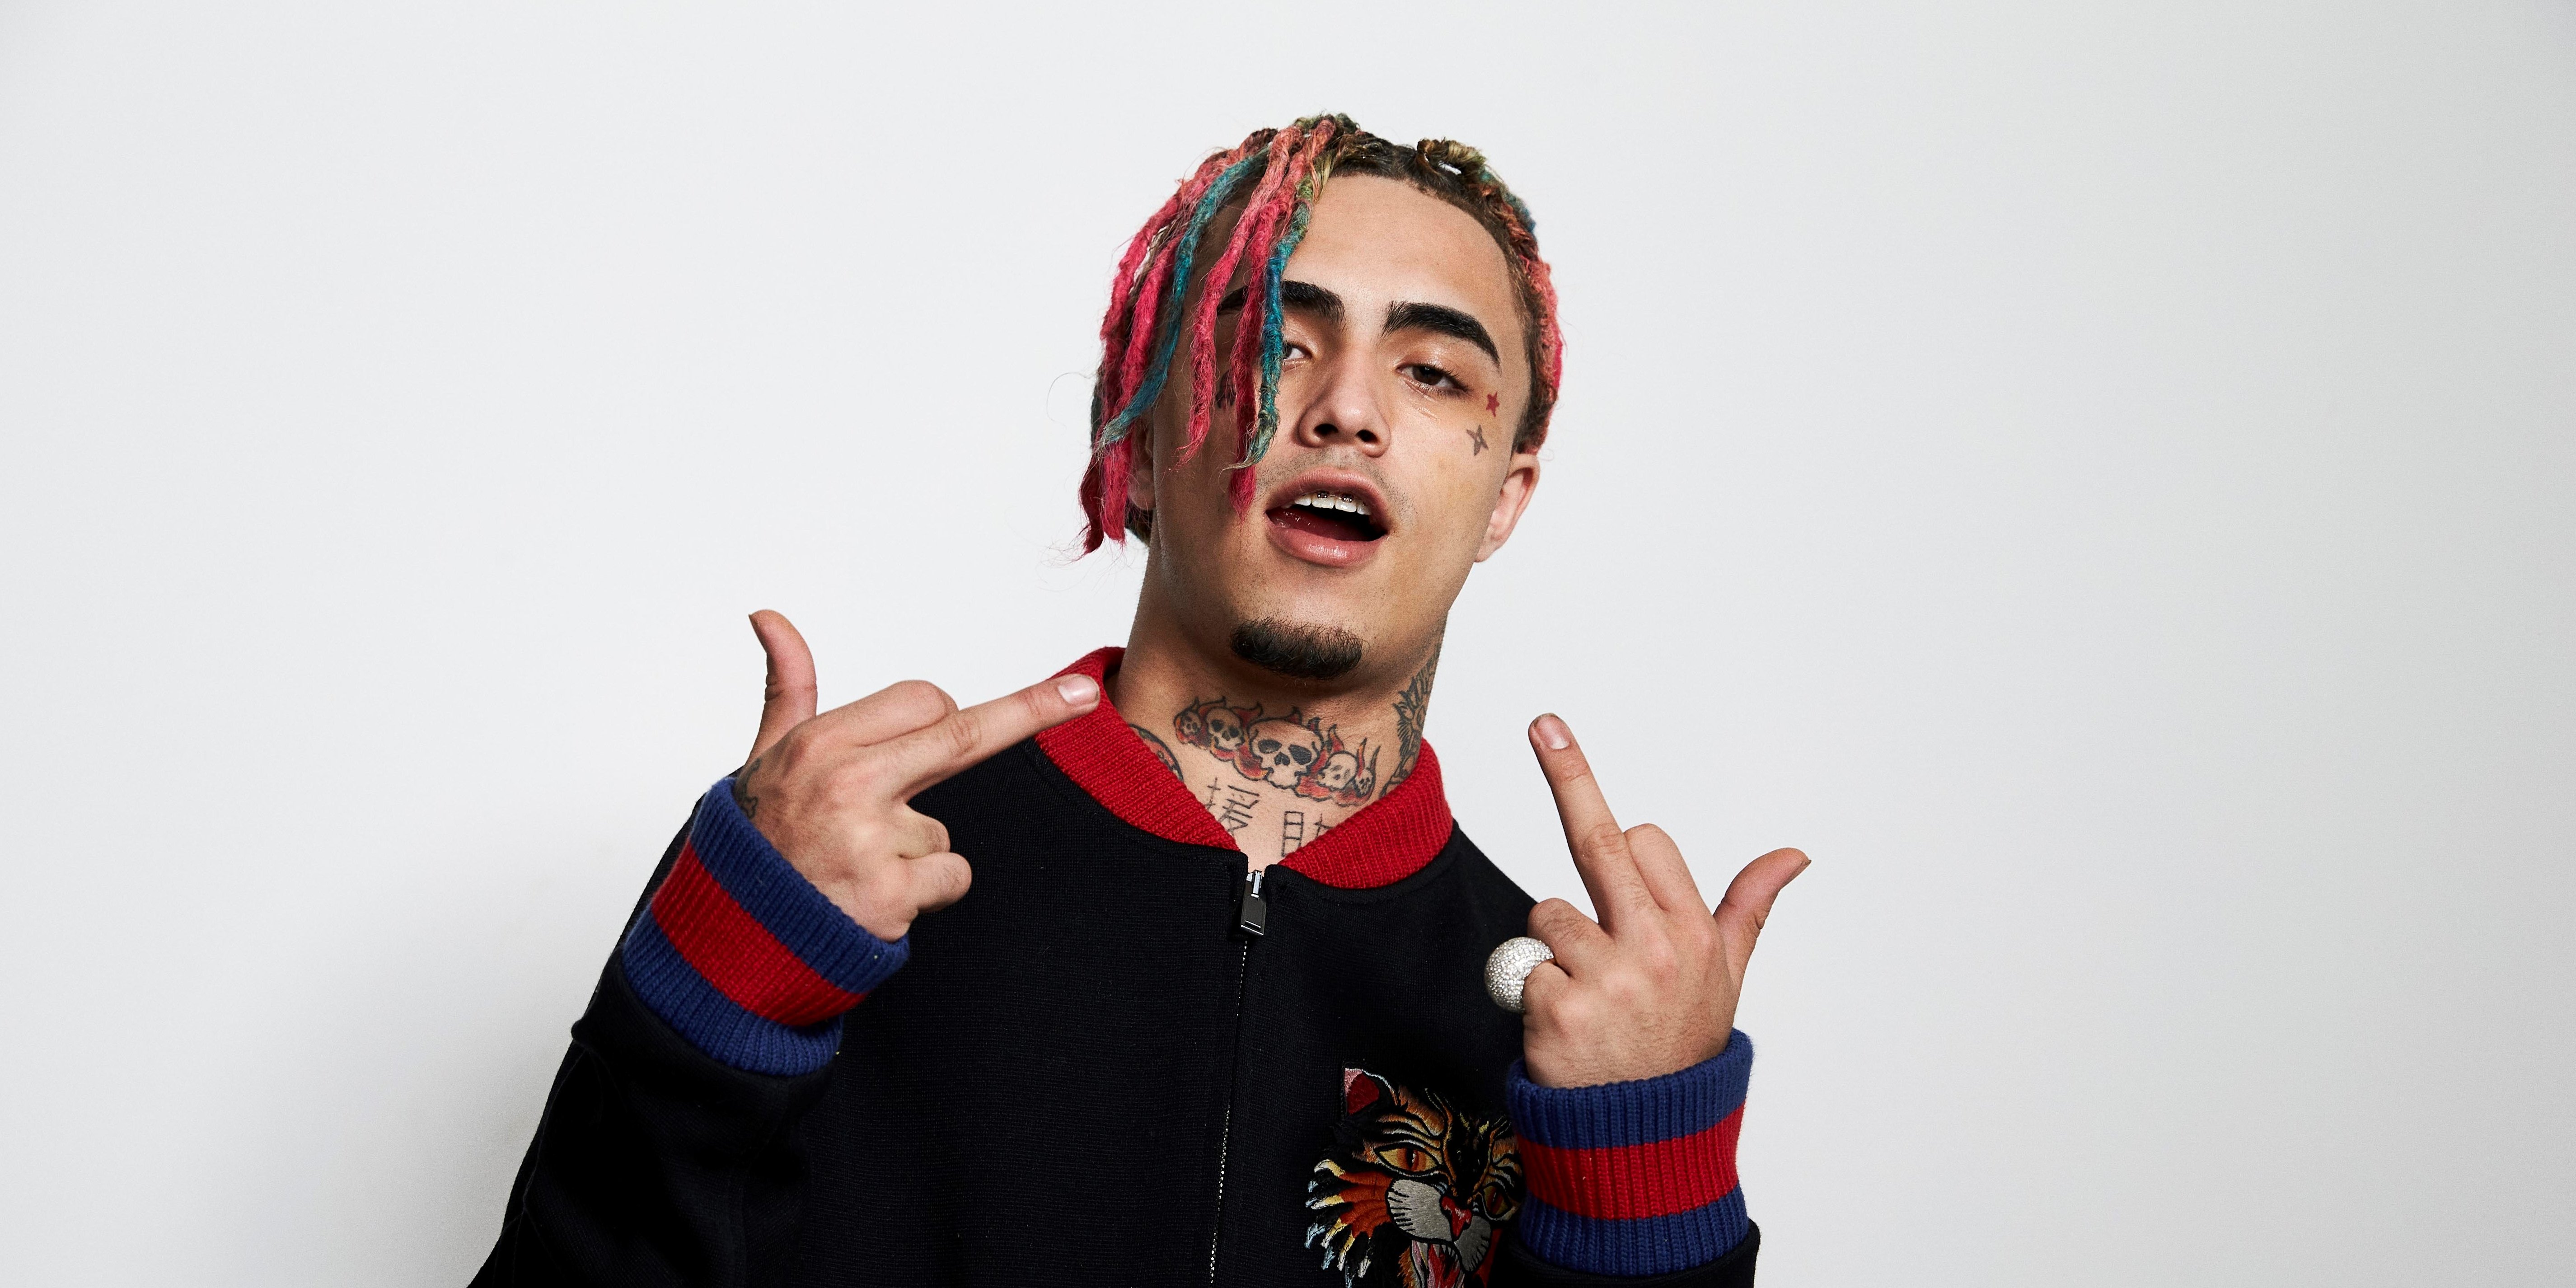 Lil pump k hd music k wallpapers images backgrounds photos and pictures